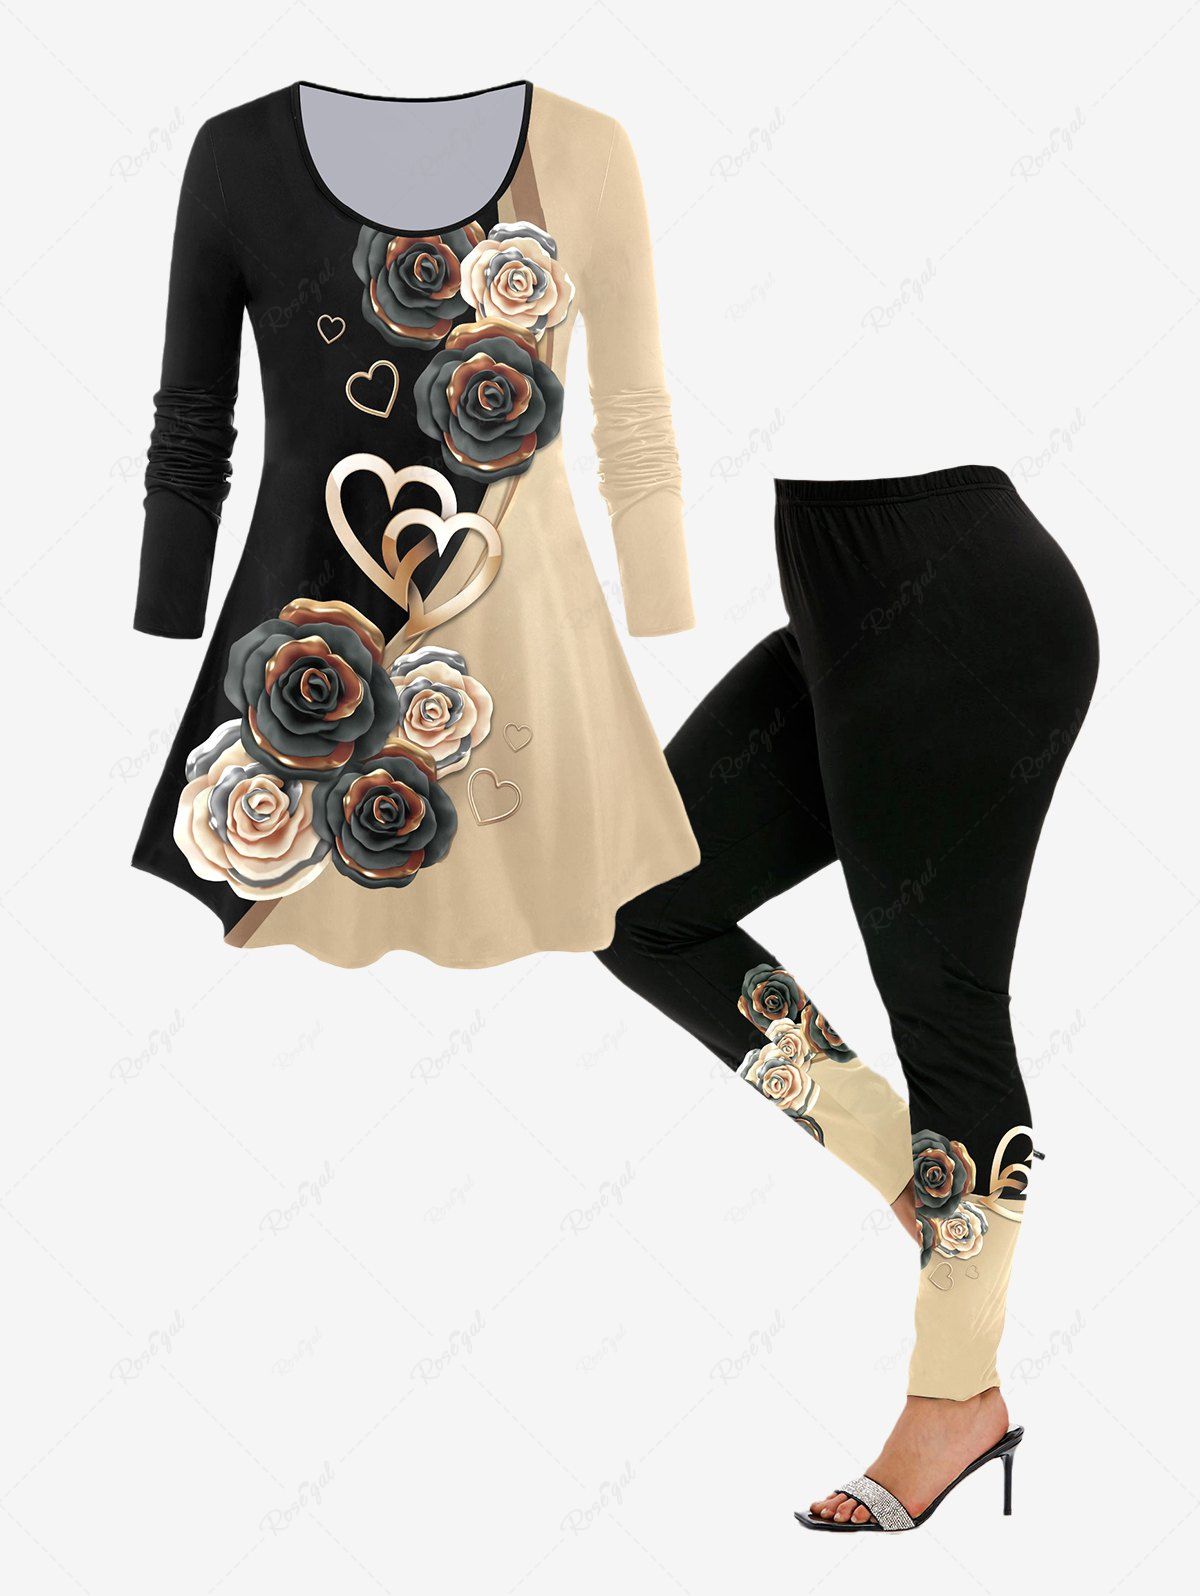 Discount Rose Heart 3D Print Colorblock T-shirt and Leggings Plus Size Outfit  